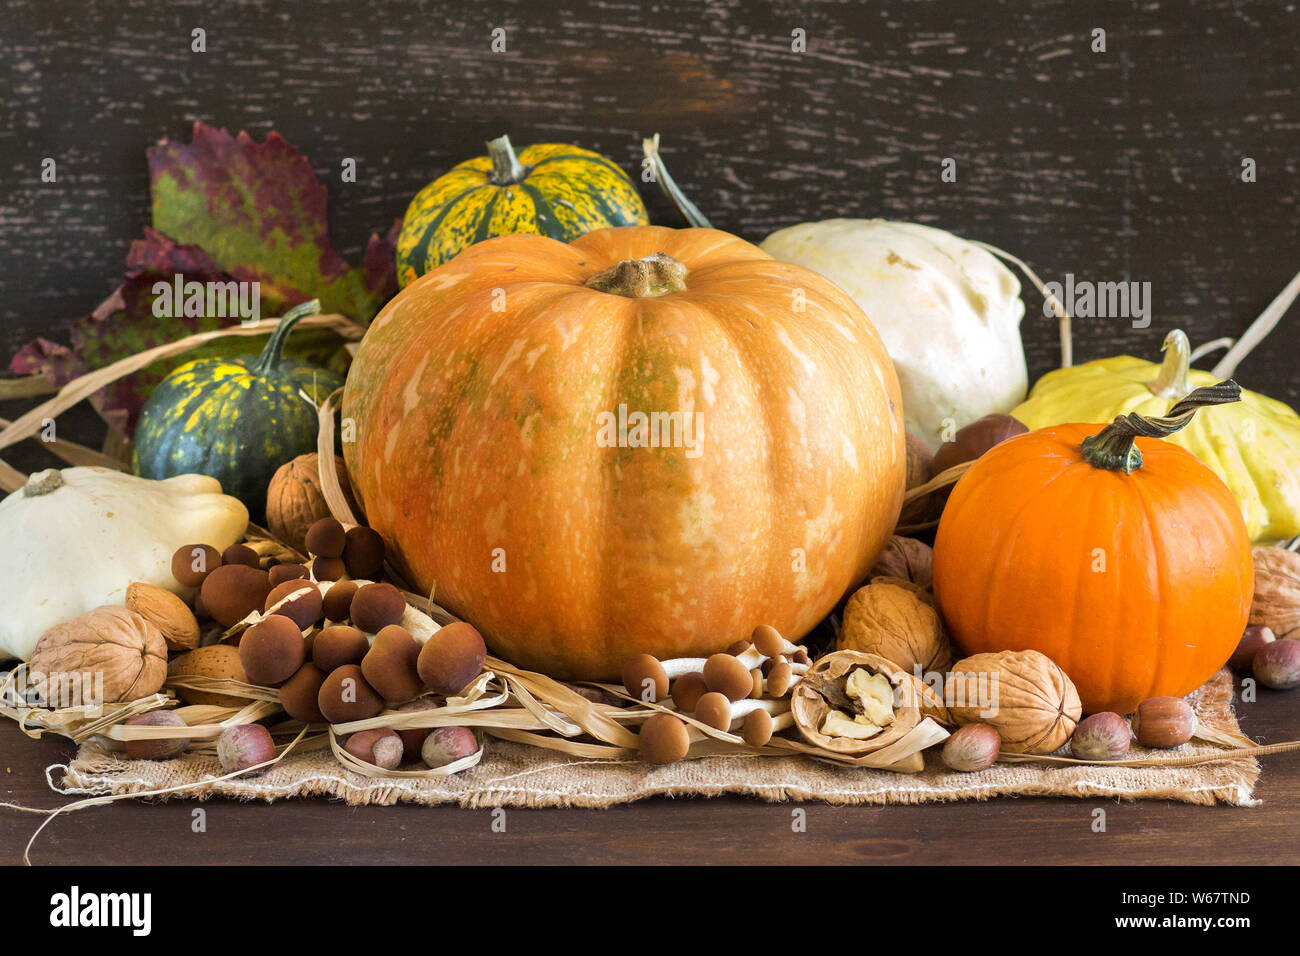 Autumn background with pumpkins, mushrooms and nuts Stock Photo